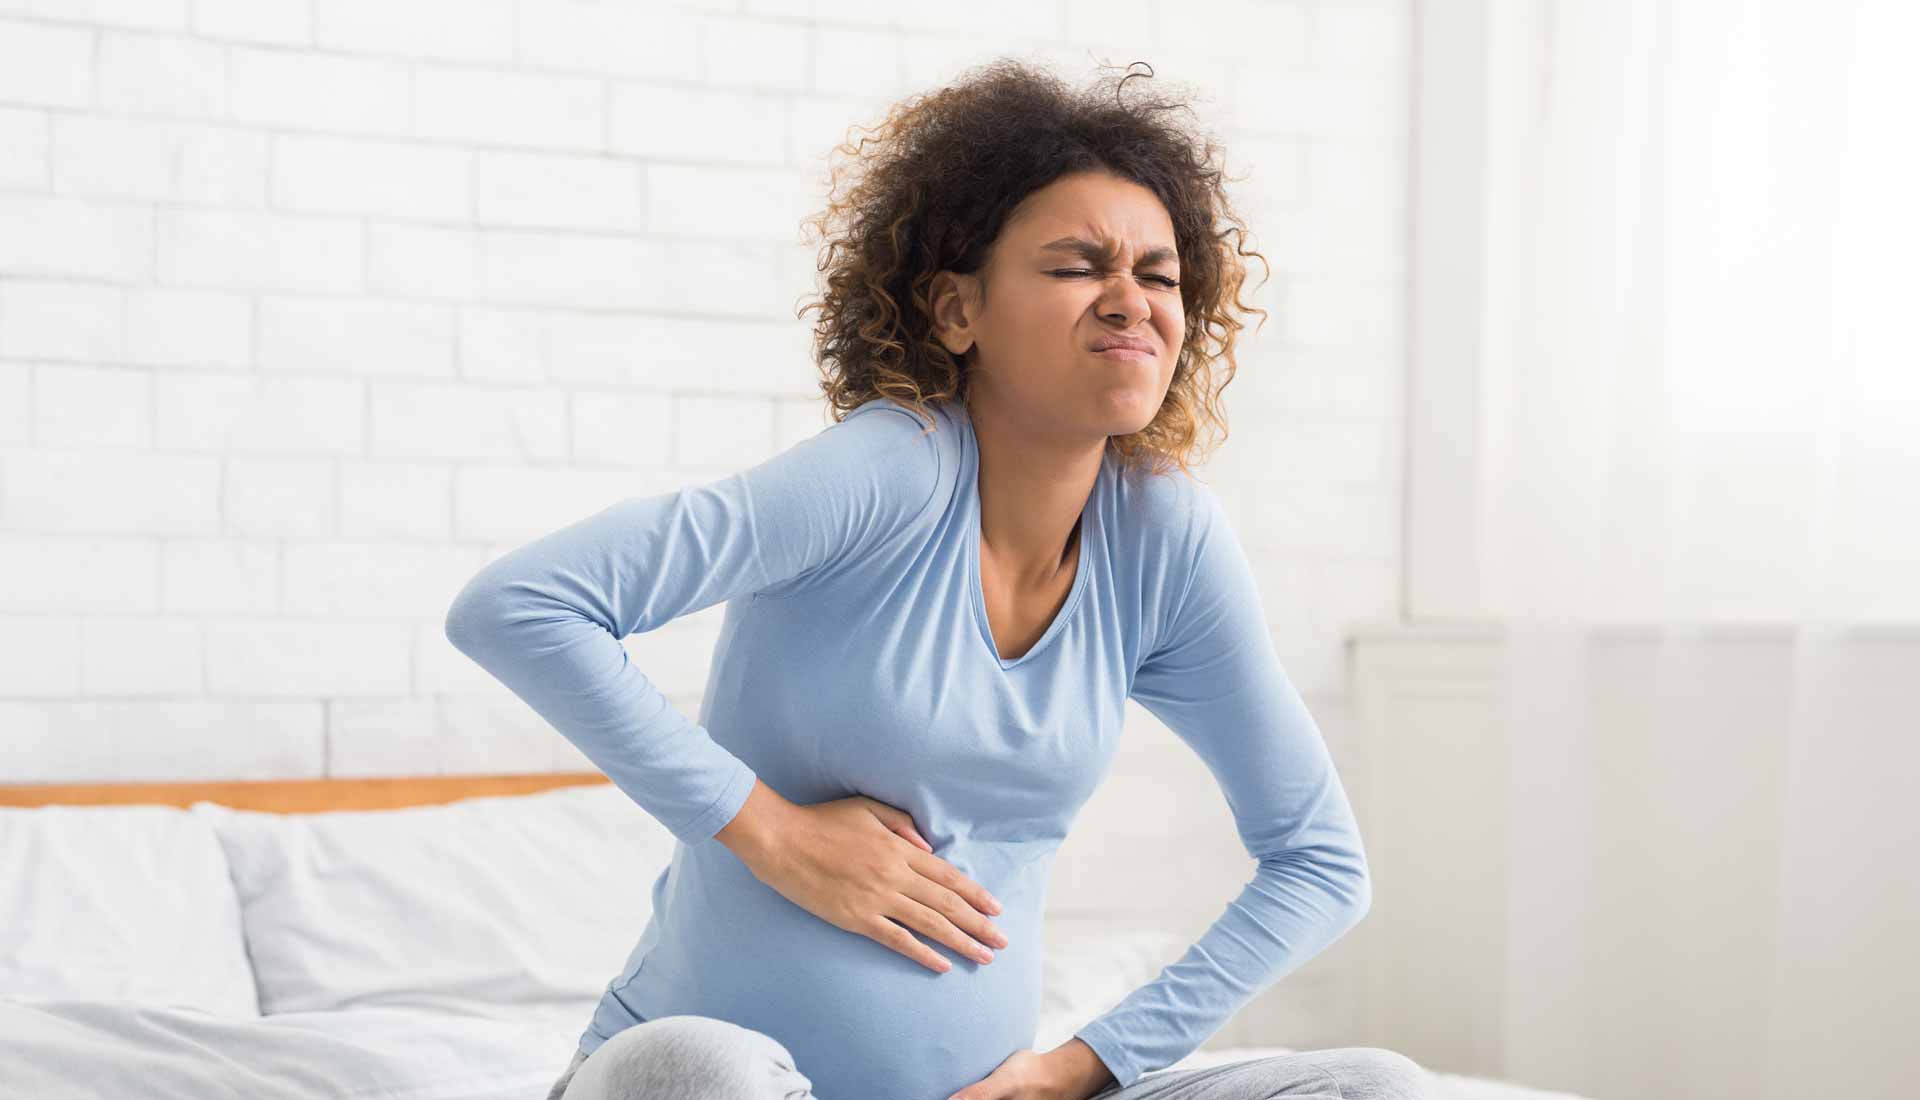 7 early signs of labour during pregnancy